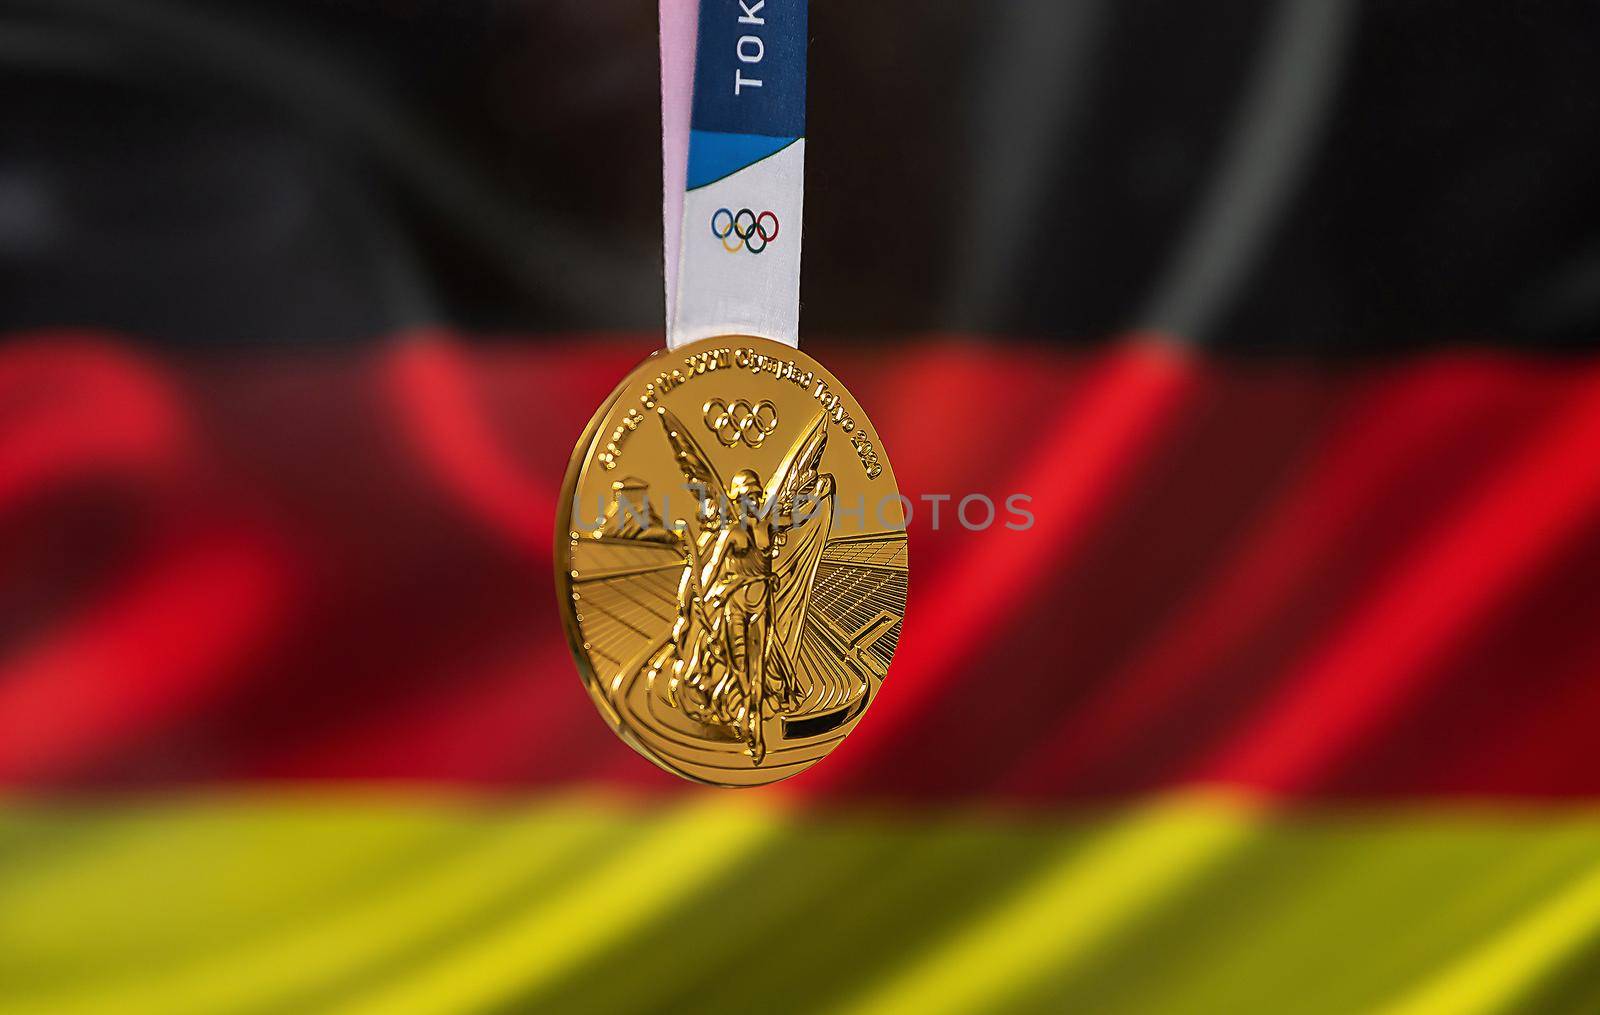 April 25, 2021 Tokyo, Japan. Gold medal of the XXXII Summer Olympic Games 2020 in Tokyo on the background of the flag of Germany.